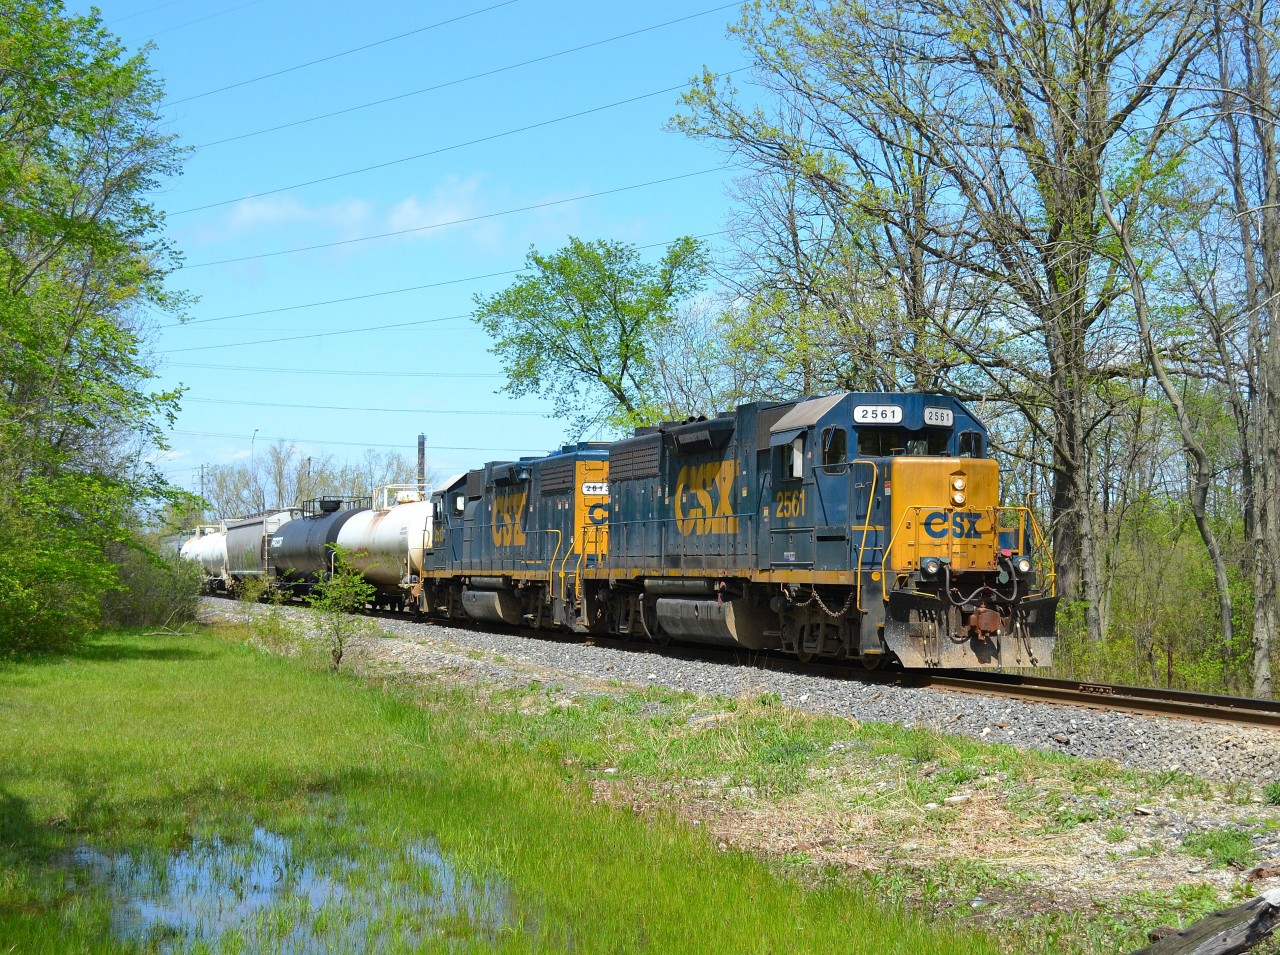 Thr Sarnia CSX local heads south on the St Clair River Industrial Spur just after doing work in the CN Sarnia Yard.